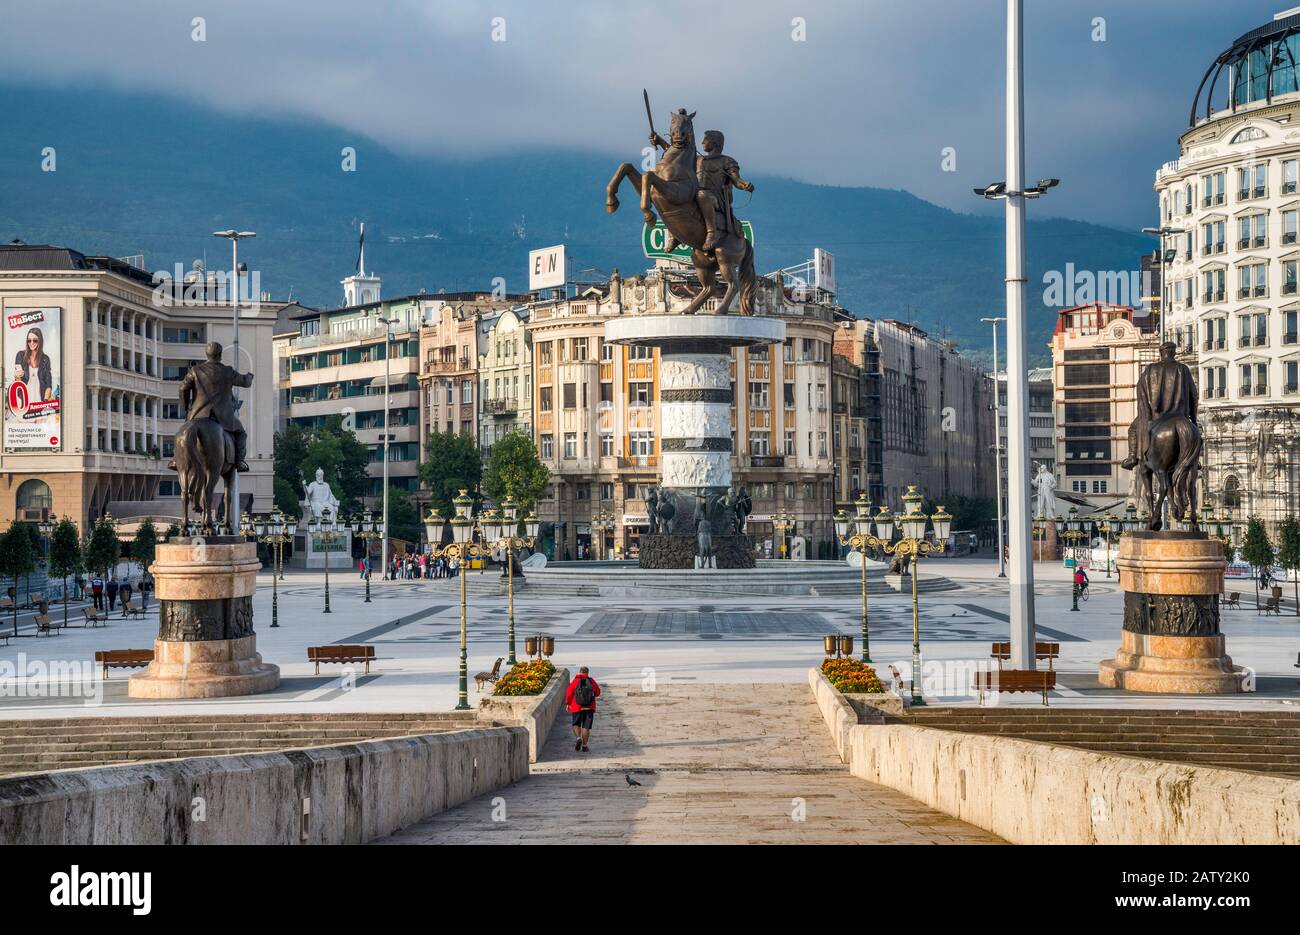 Warrior on a Horse, current official name of Alexander the Great monument at Macedonia Square, seen from Stone Bridge, Skopje, North Macedonia Stock Photo